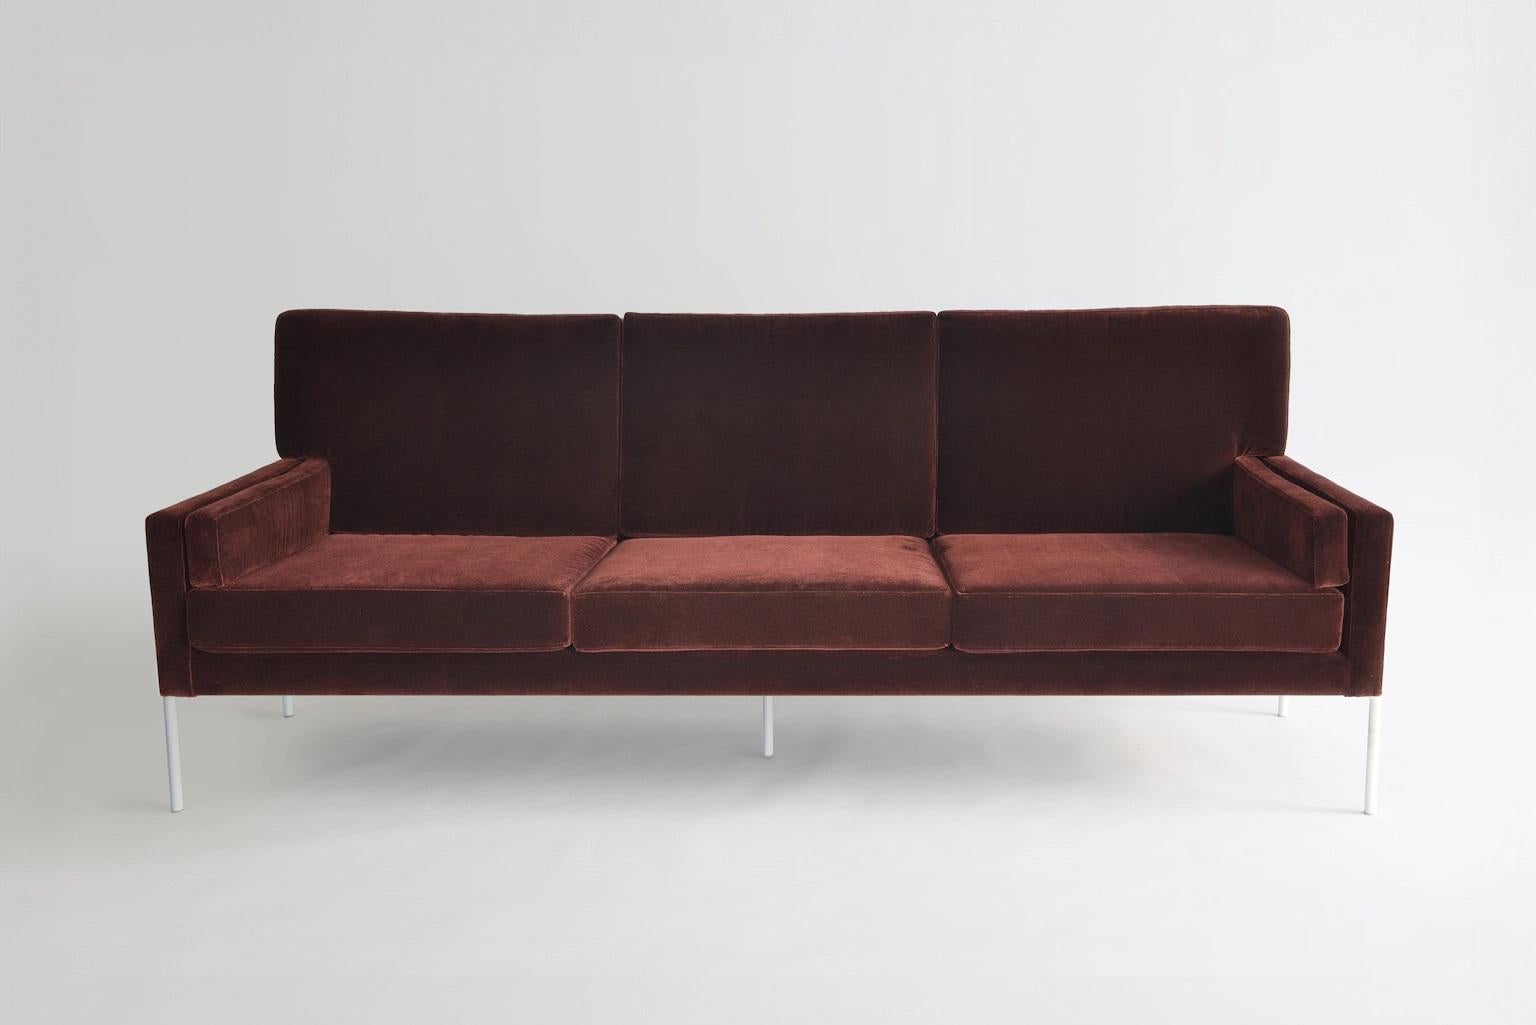 Trolley Sofa by Phase Design
Dimensions: D 77.5 x W 212.7 x H 81.3 cm. 
Materials: Upholstery and powder-coated metal.

Solid steel bar available in a smoked brass, polished chrome, burnt copper, or powder coat finish with an upholstered top. Powder